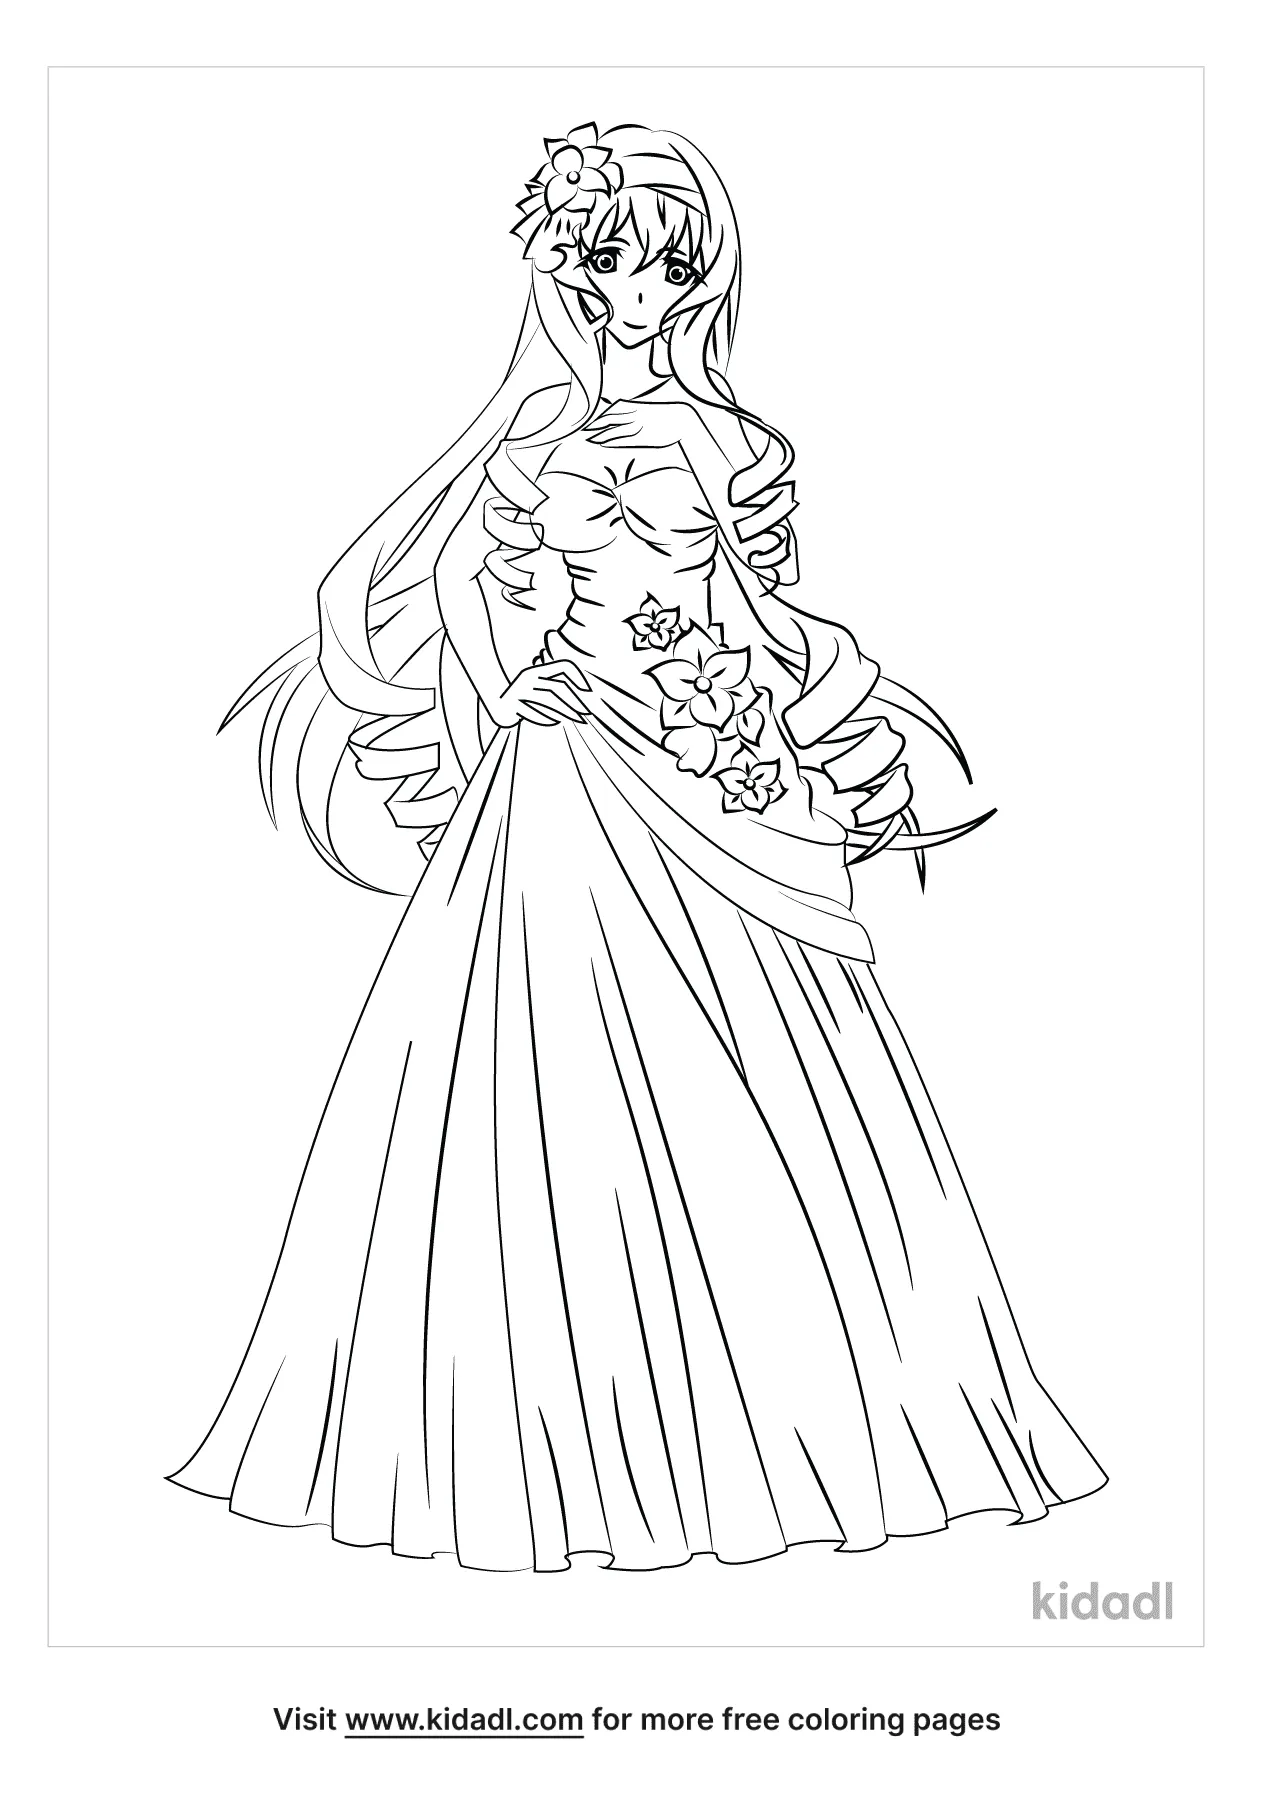 Anime Girl In Dress Coloring Page